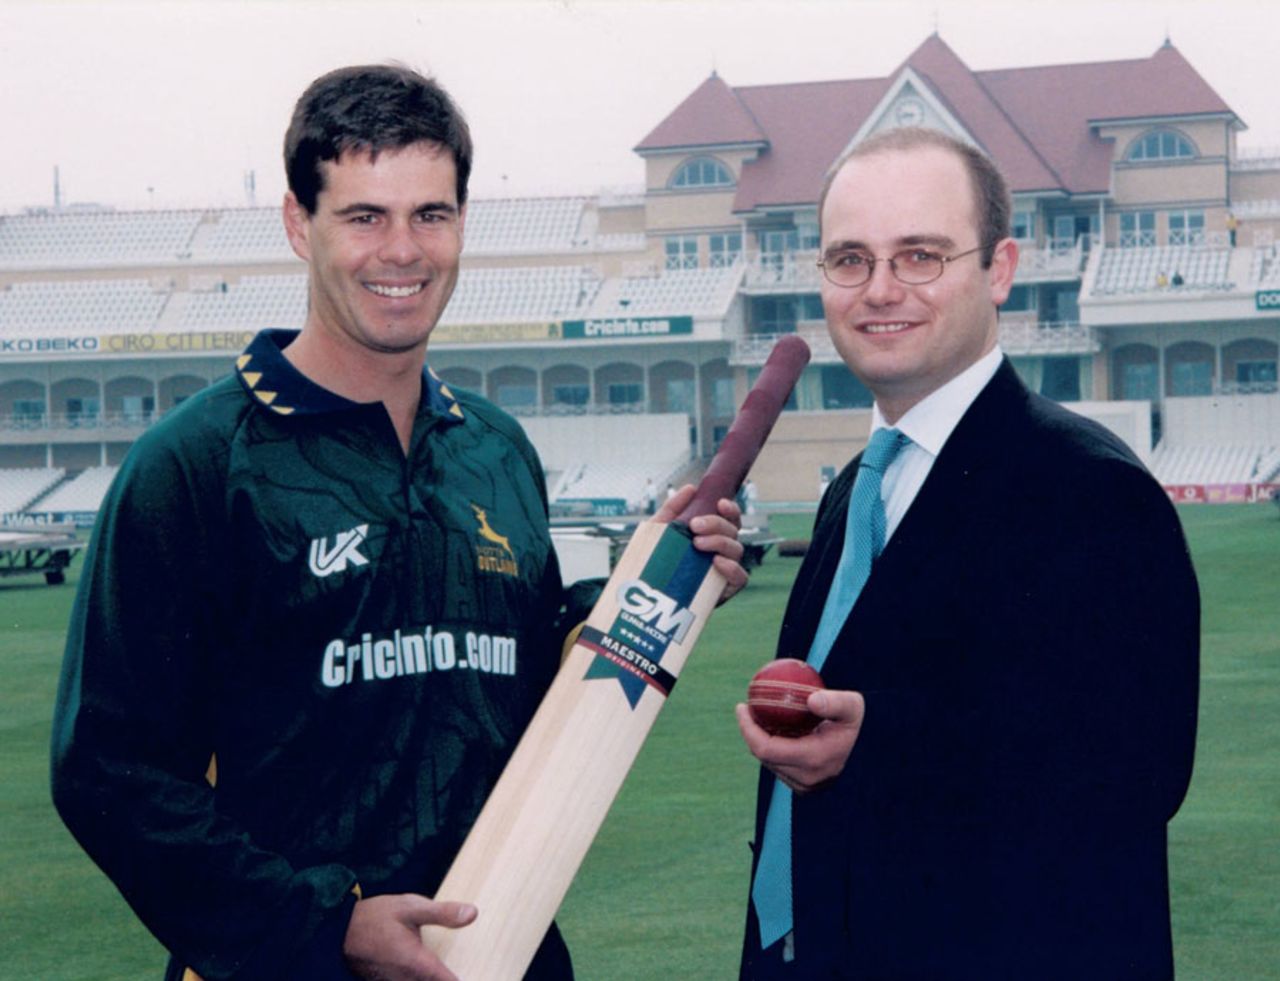 Nottinghamshire captain Stephen Fleming and Cricino supremo Andrew Hall in a snappy pre-season publicity shot, Trent Bridge, April 22, 2001